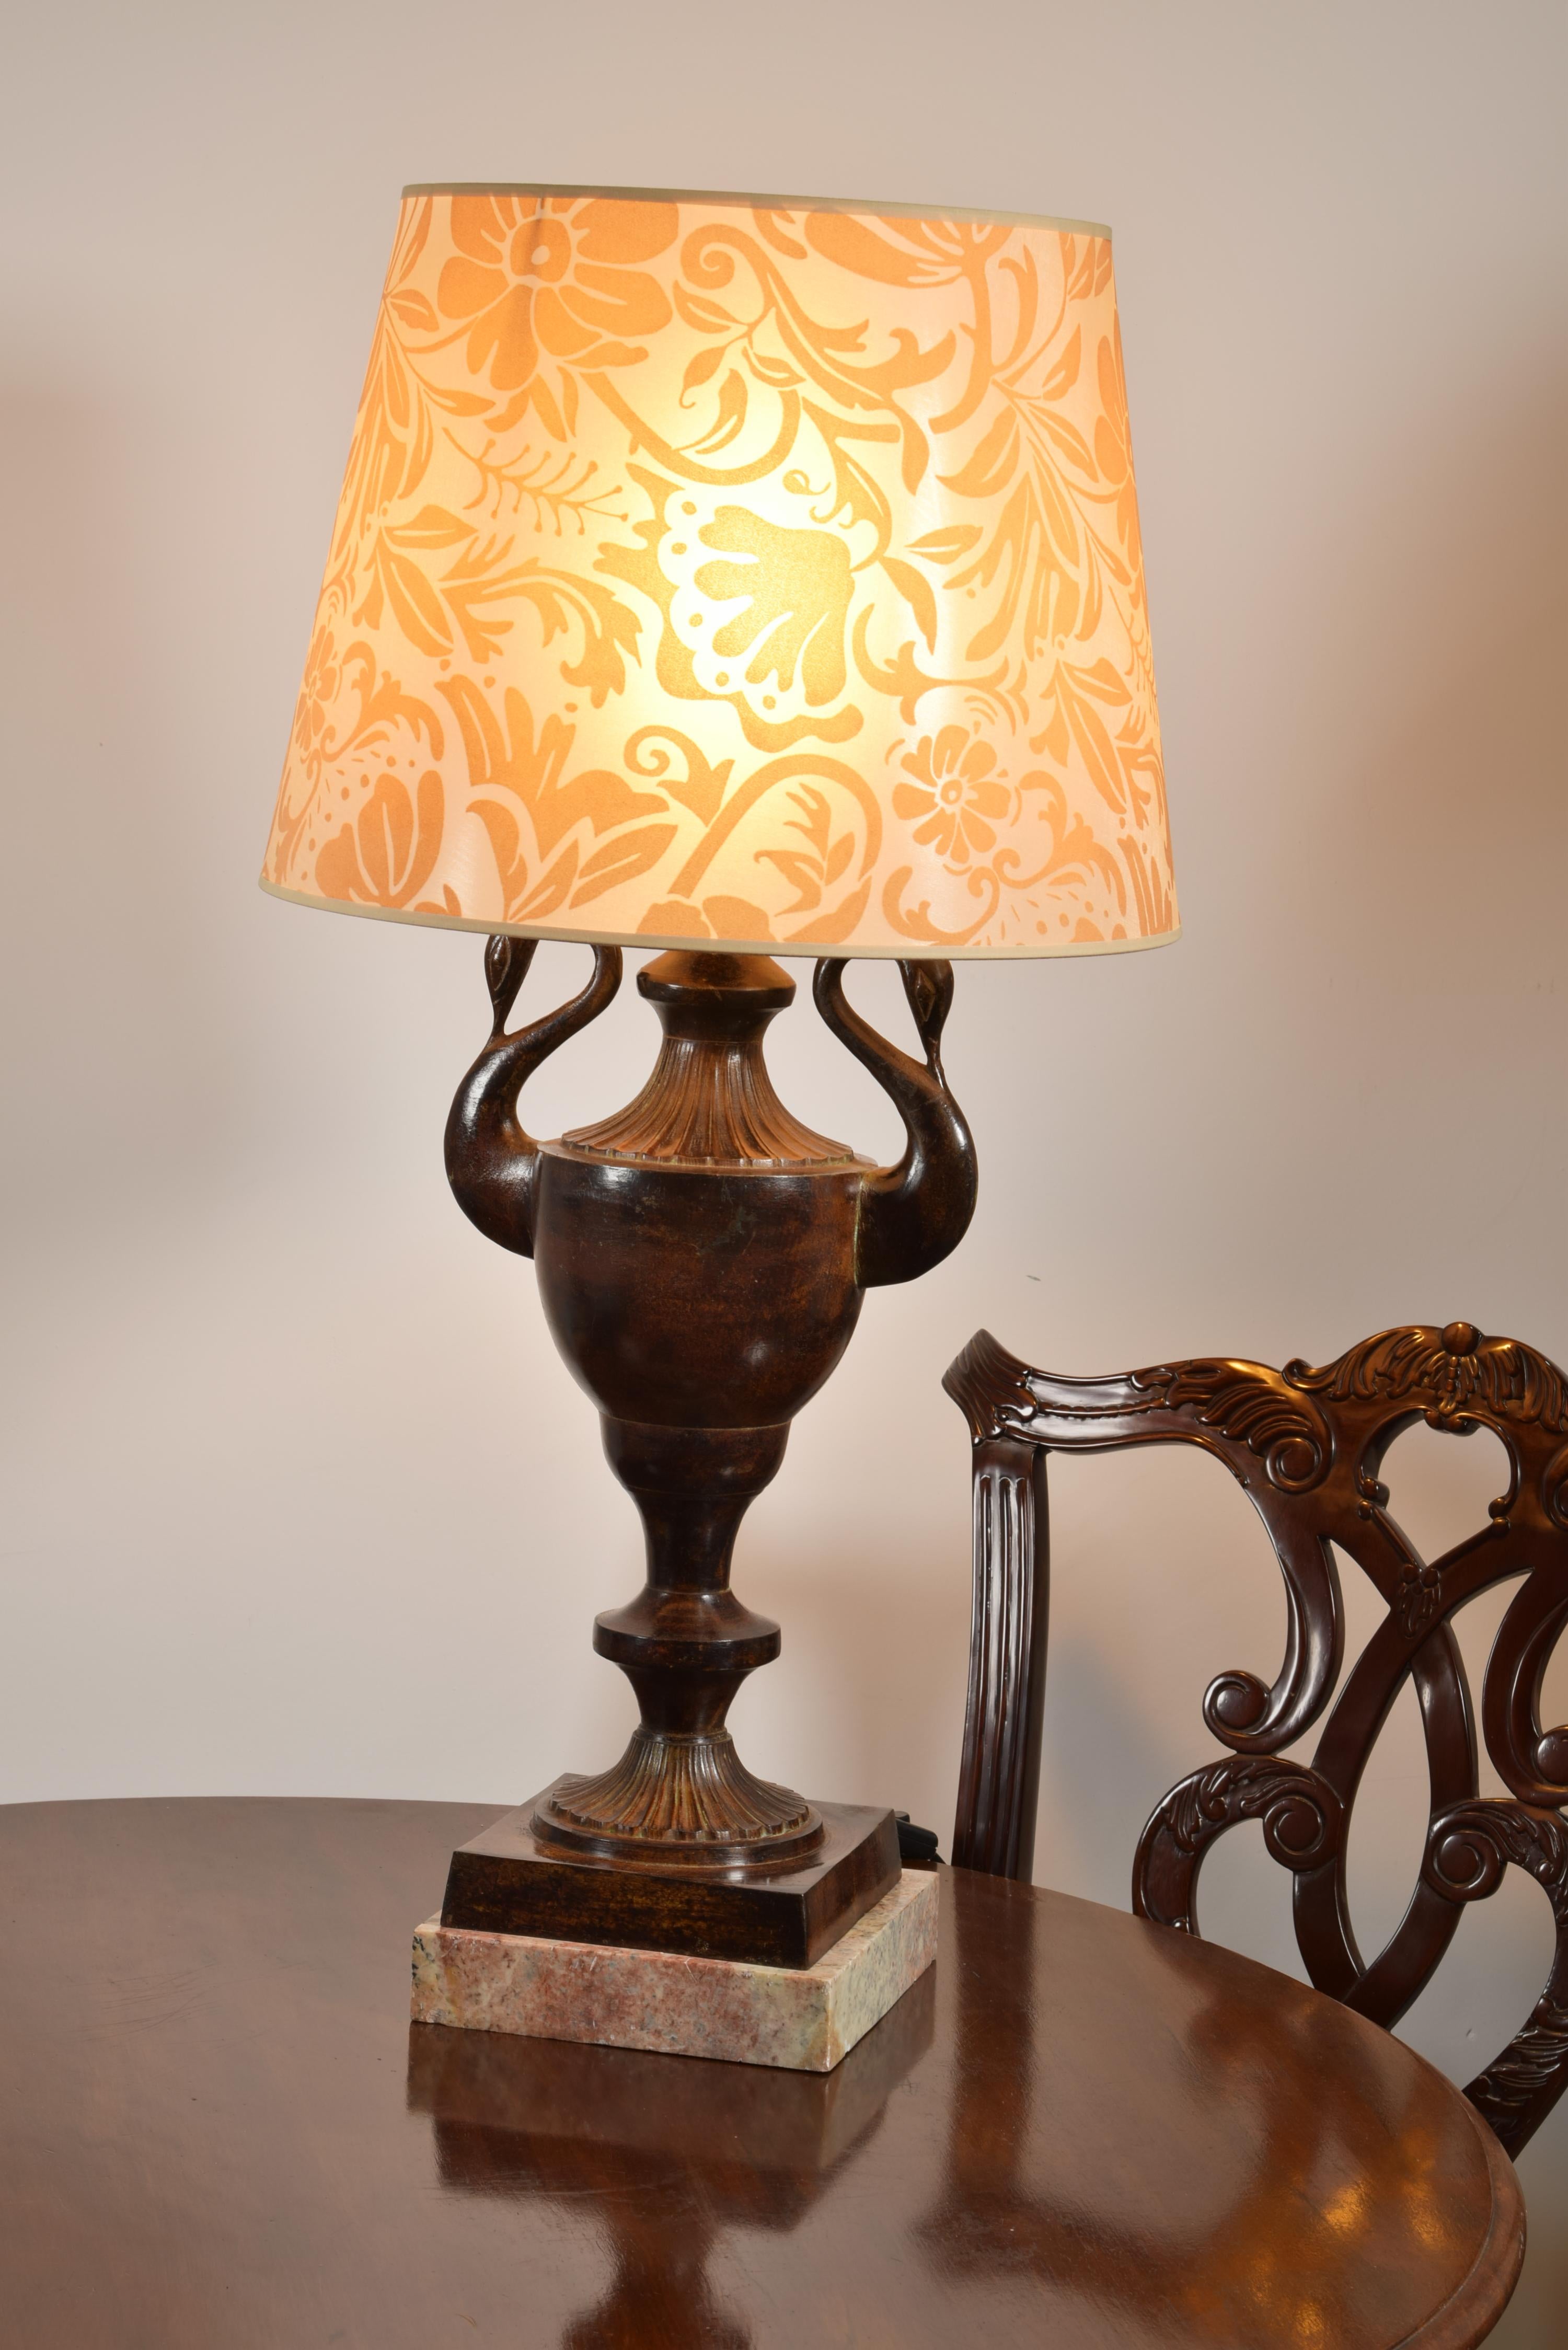 20th Century Empire Style Table Lamp (No Shade). Bronze, Marble For Sale